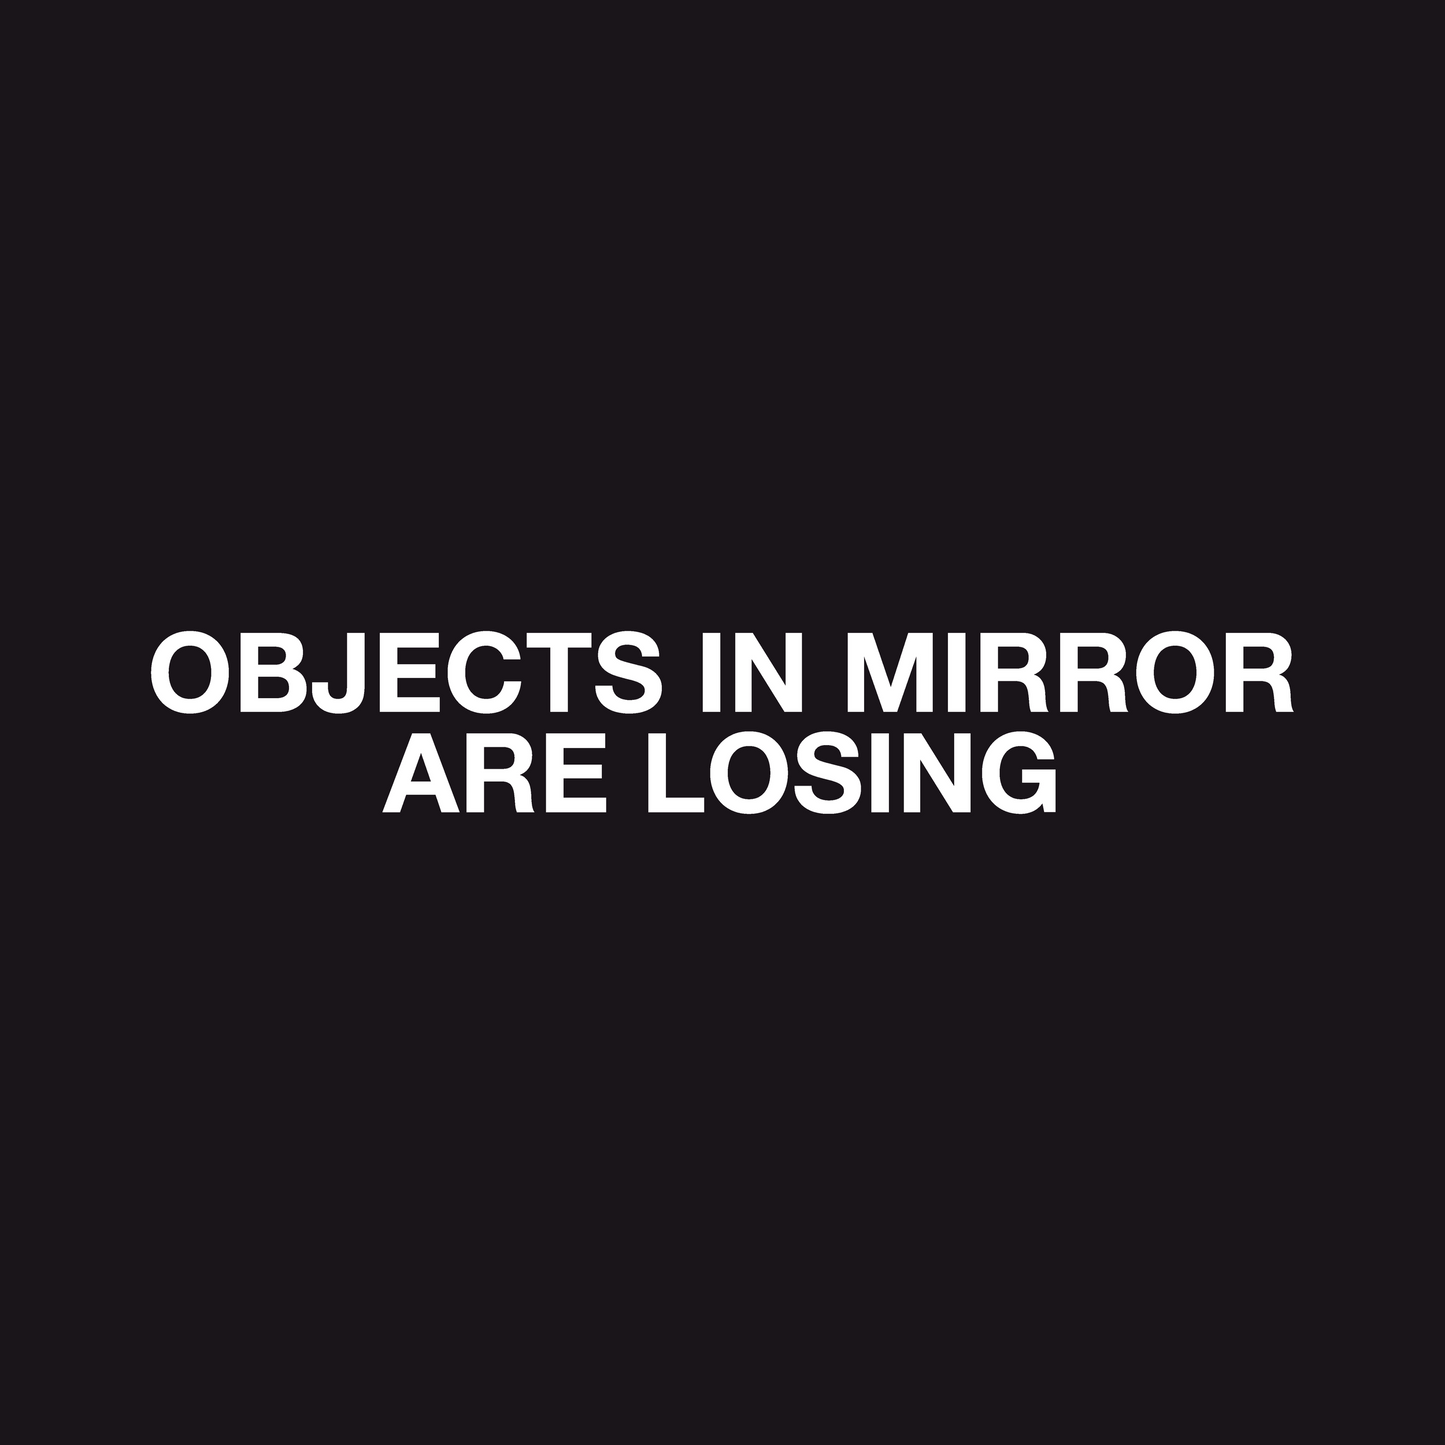 Objects Are Losing Mirror Sticker